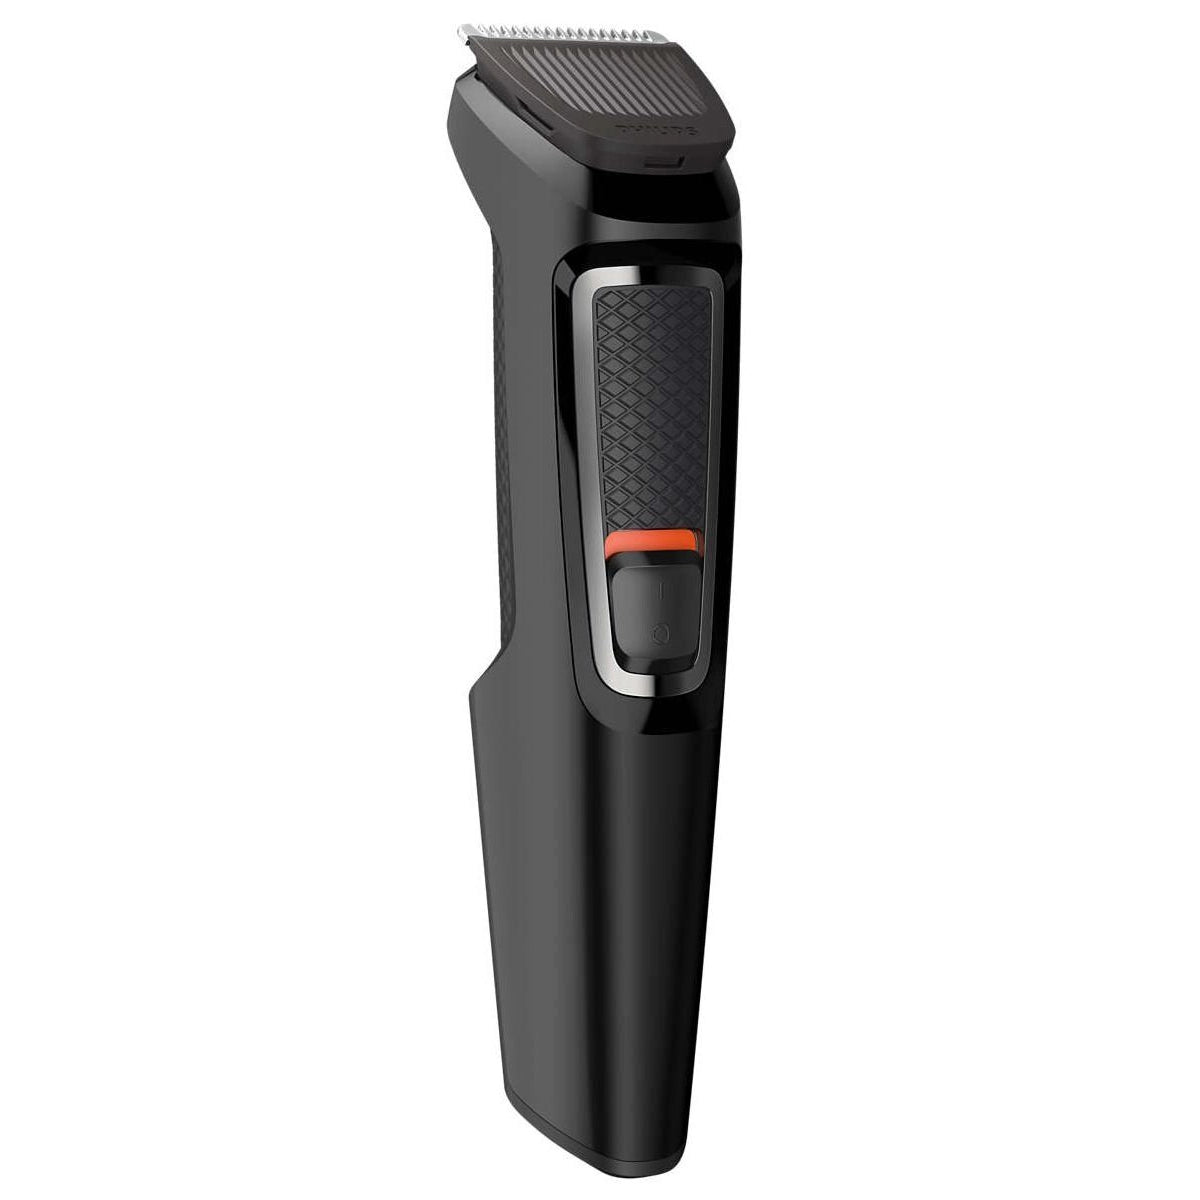 Philips - Multigroom series 3000 8-in-1, Face and Hair - MG3730/15